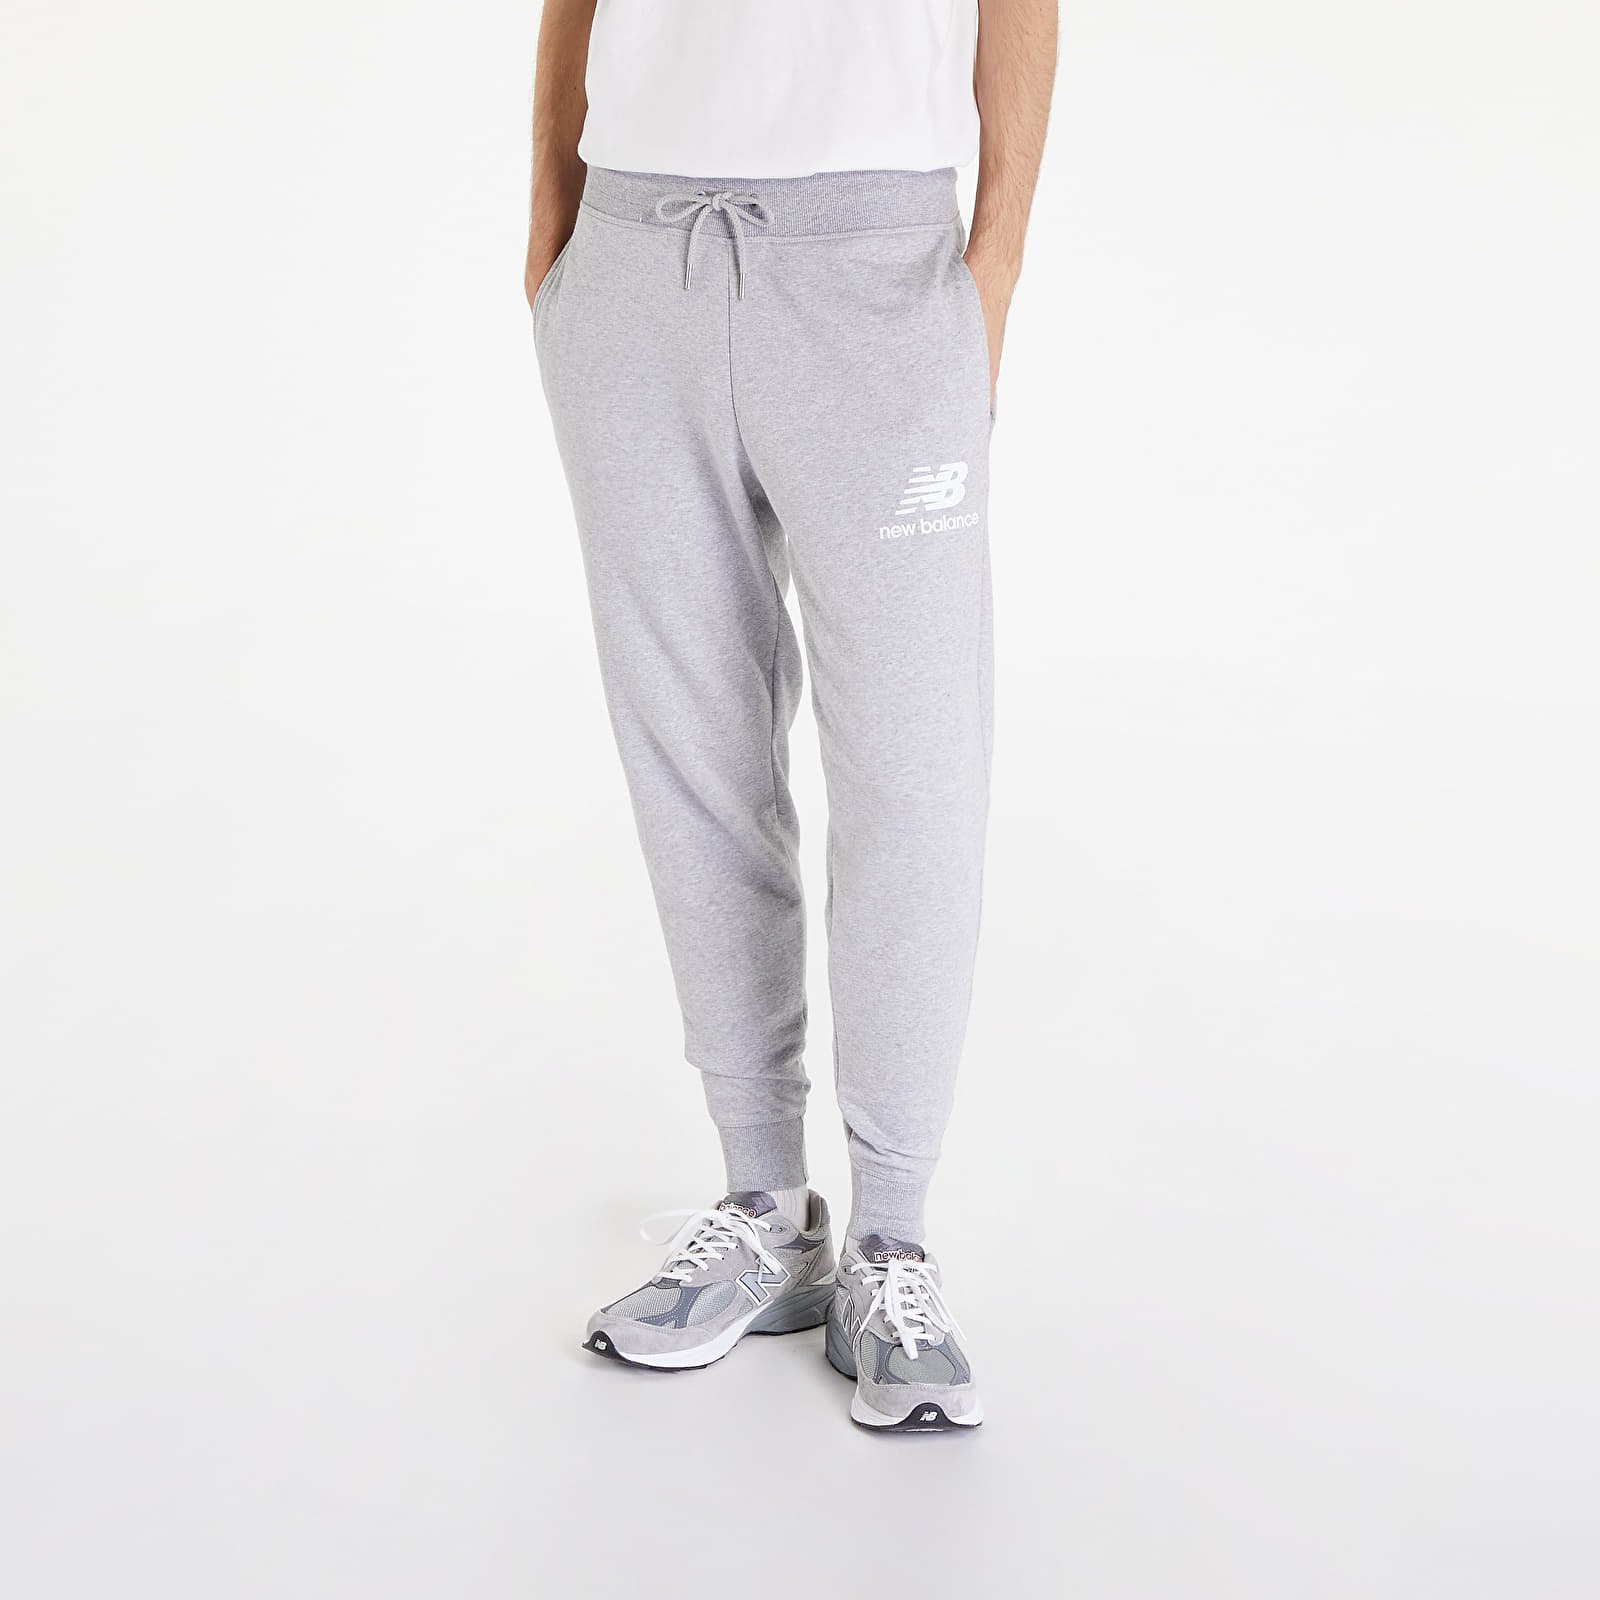 Pants Stacked Logo and | Balance Essentials Athletic Footshop jeans New Sweatpant Grey